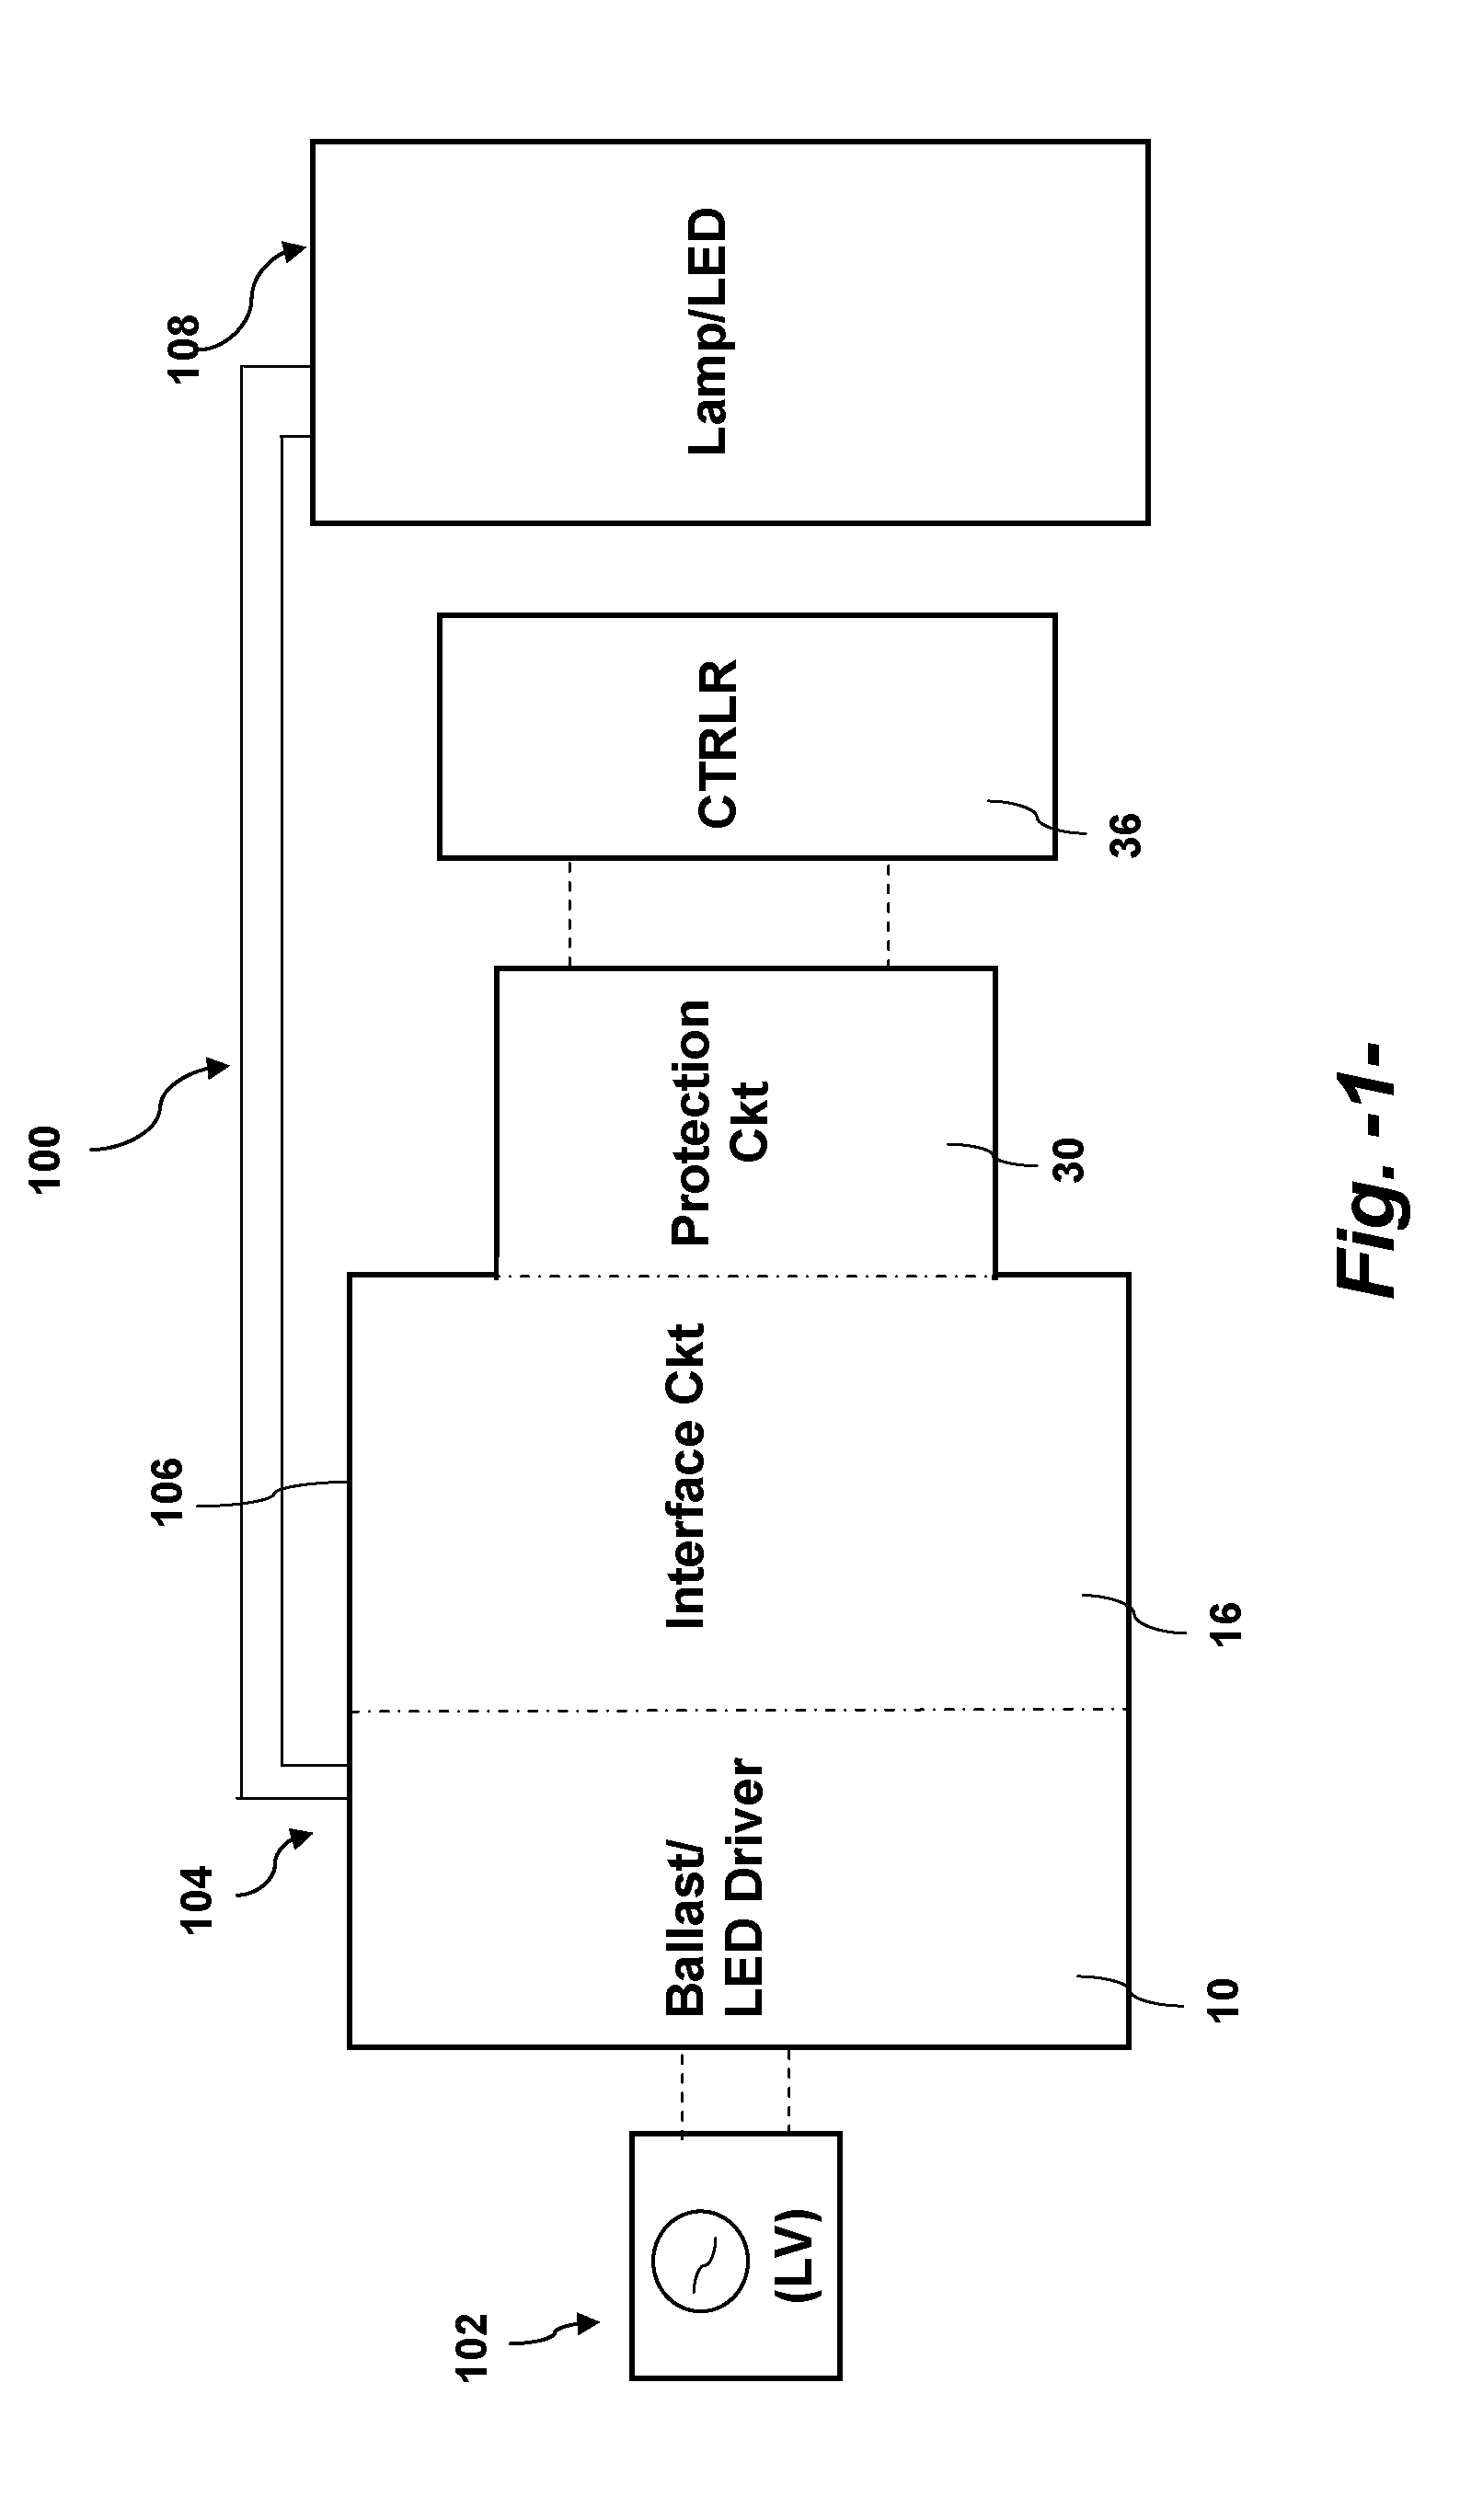 Lamp assembly and circuits for protection against miswiring in a lamp controller